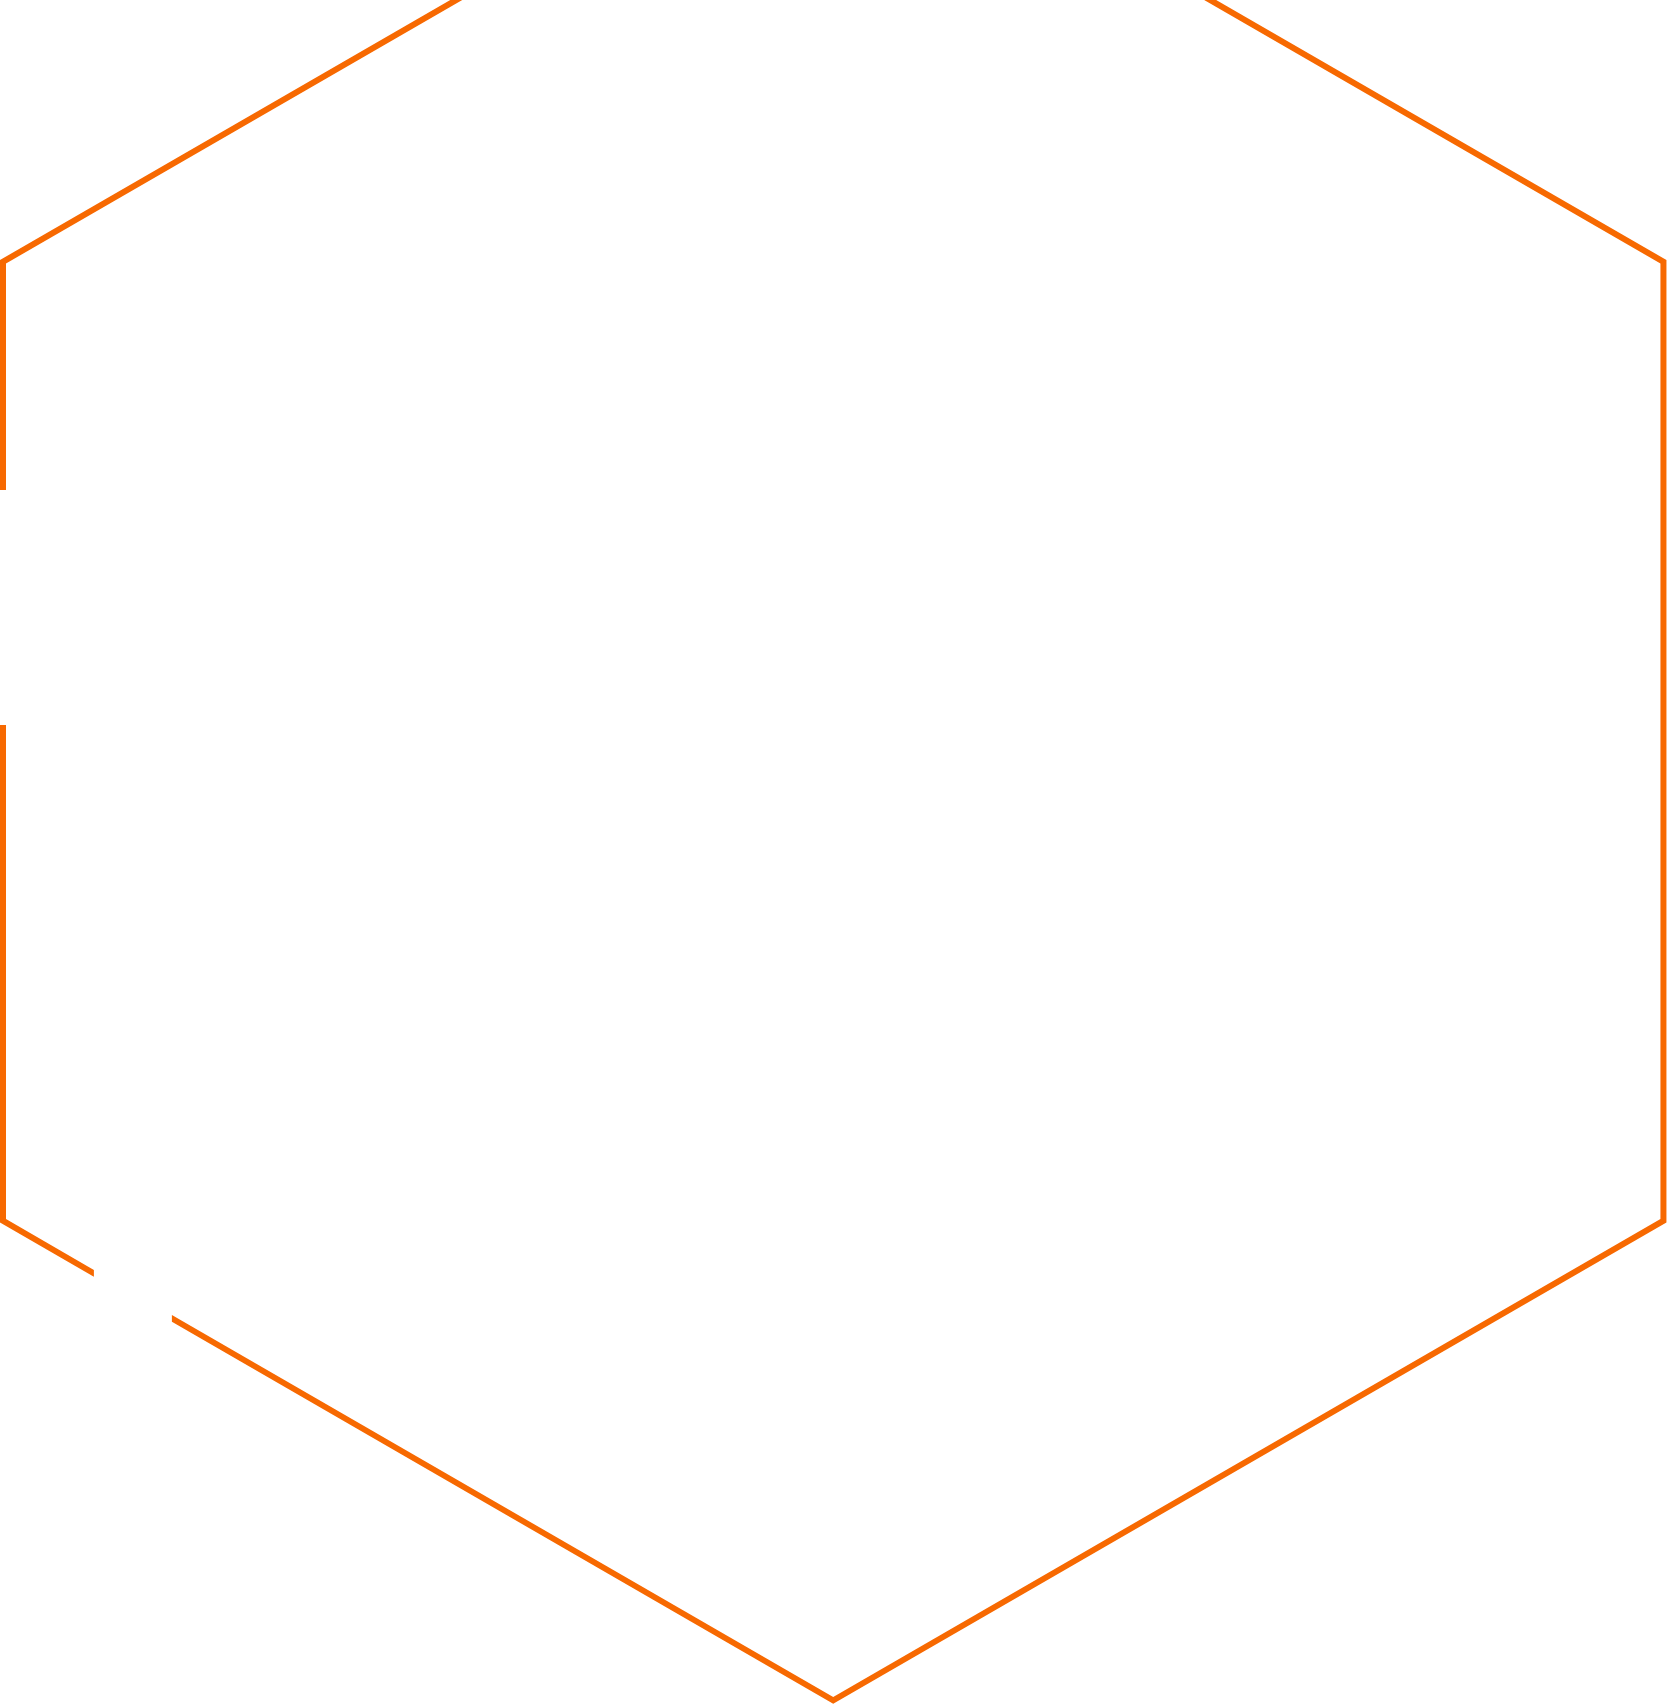 Hexagonal graphic with the text Unfolding the universe